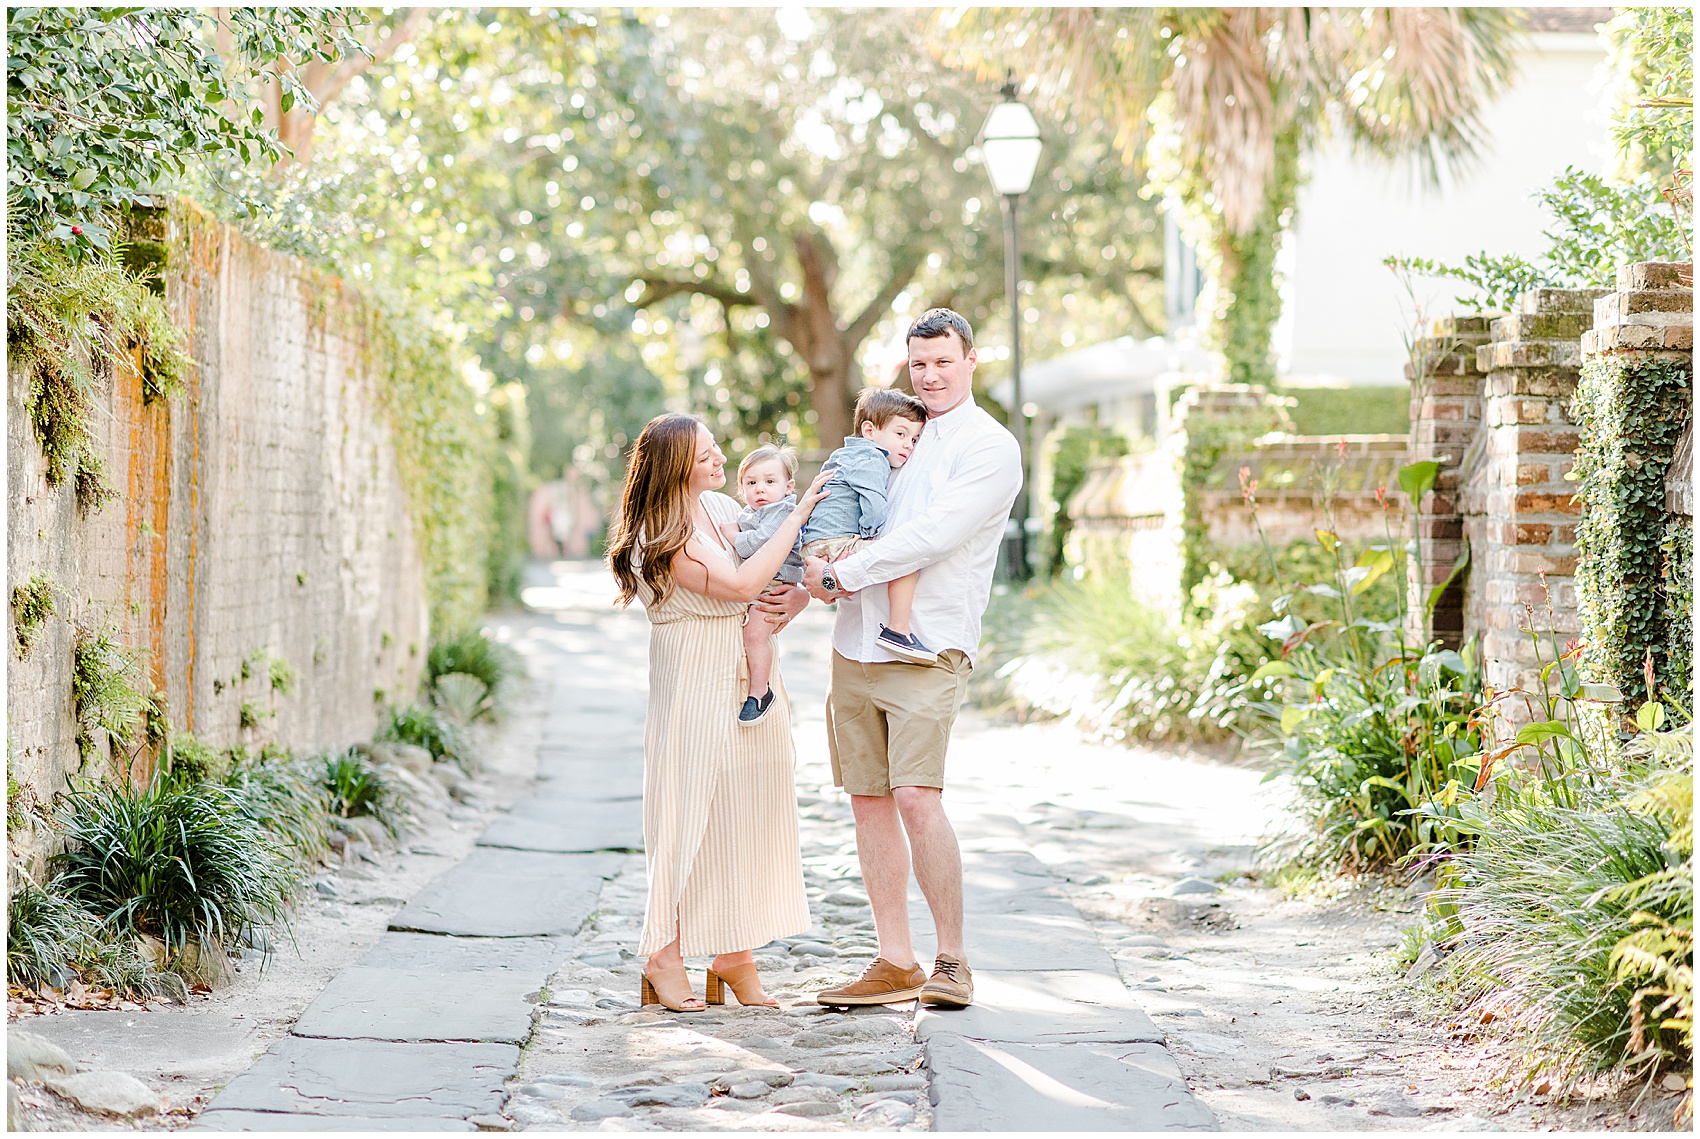 south of broad downtown Charlestion Folly Beach charleston wedding photographer session Lowcountry Charleston SC wedding Photographer_1970.jpg